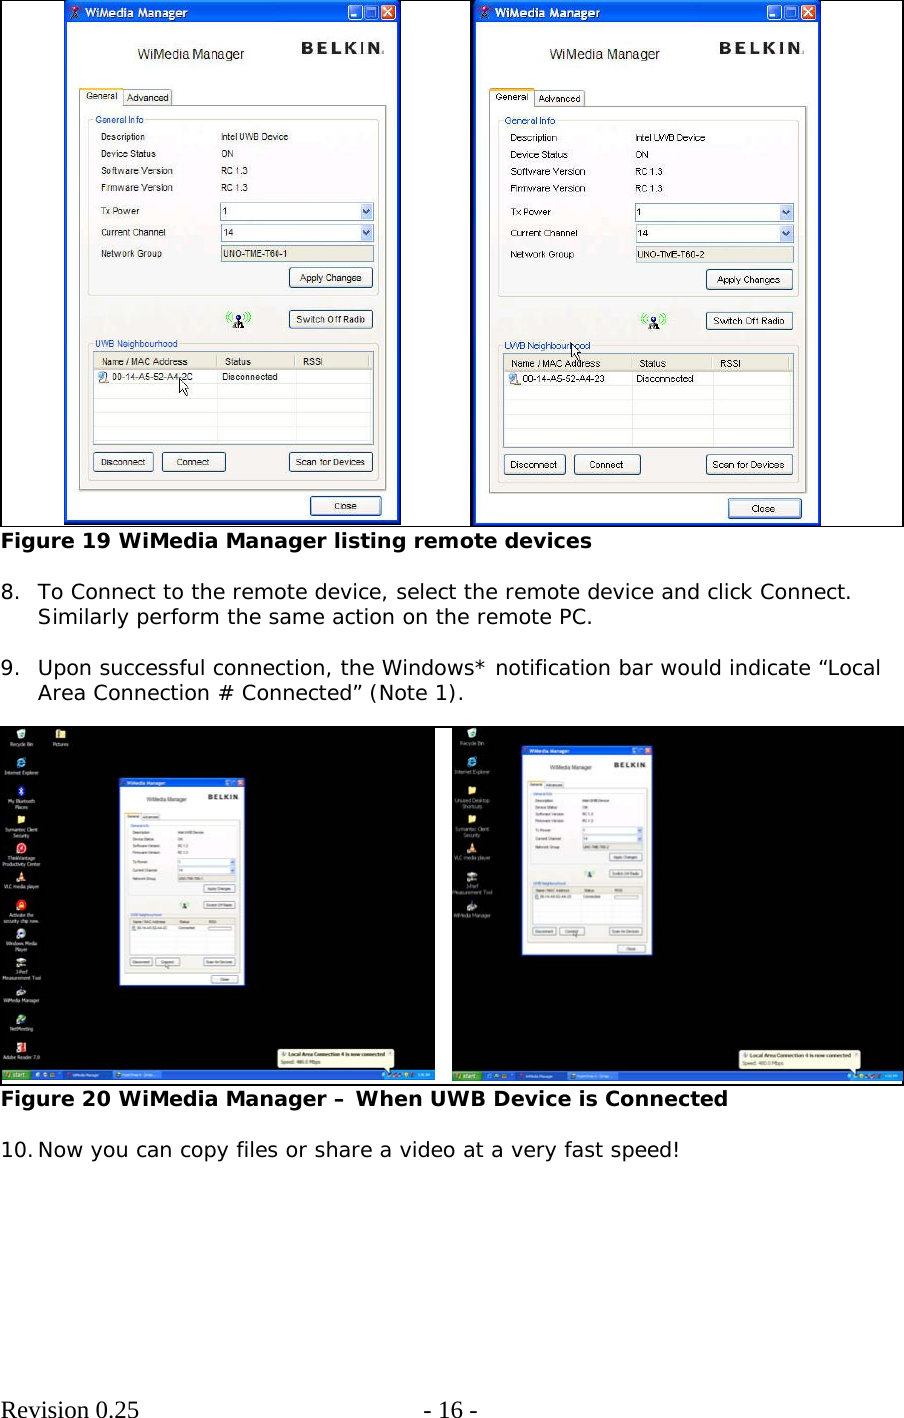        Revision 0.25  - 16 -      Figure 19 WiMedia Manager listing remote devices  8. To Connect to the remote device, select the remote device and click Connect. Similarly perform the same action on the remote PC.  9. Upon successful connection, the Windows* notification bar would indicate “Local Area Connection # Connected” (Note 1).   Figure 20 WiMedia Manager – When UWB Device is Connected  10. Now you can copy files or share a video at a very fast speed!   